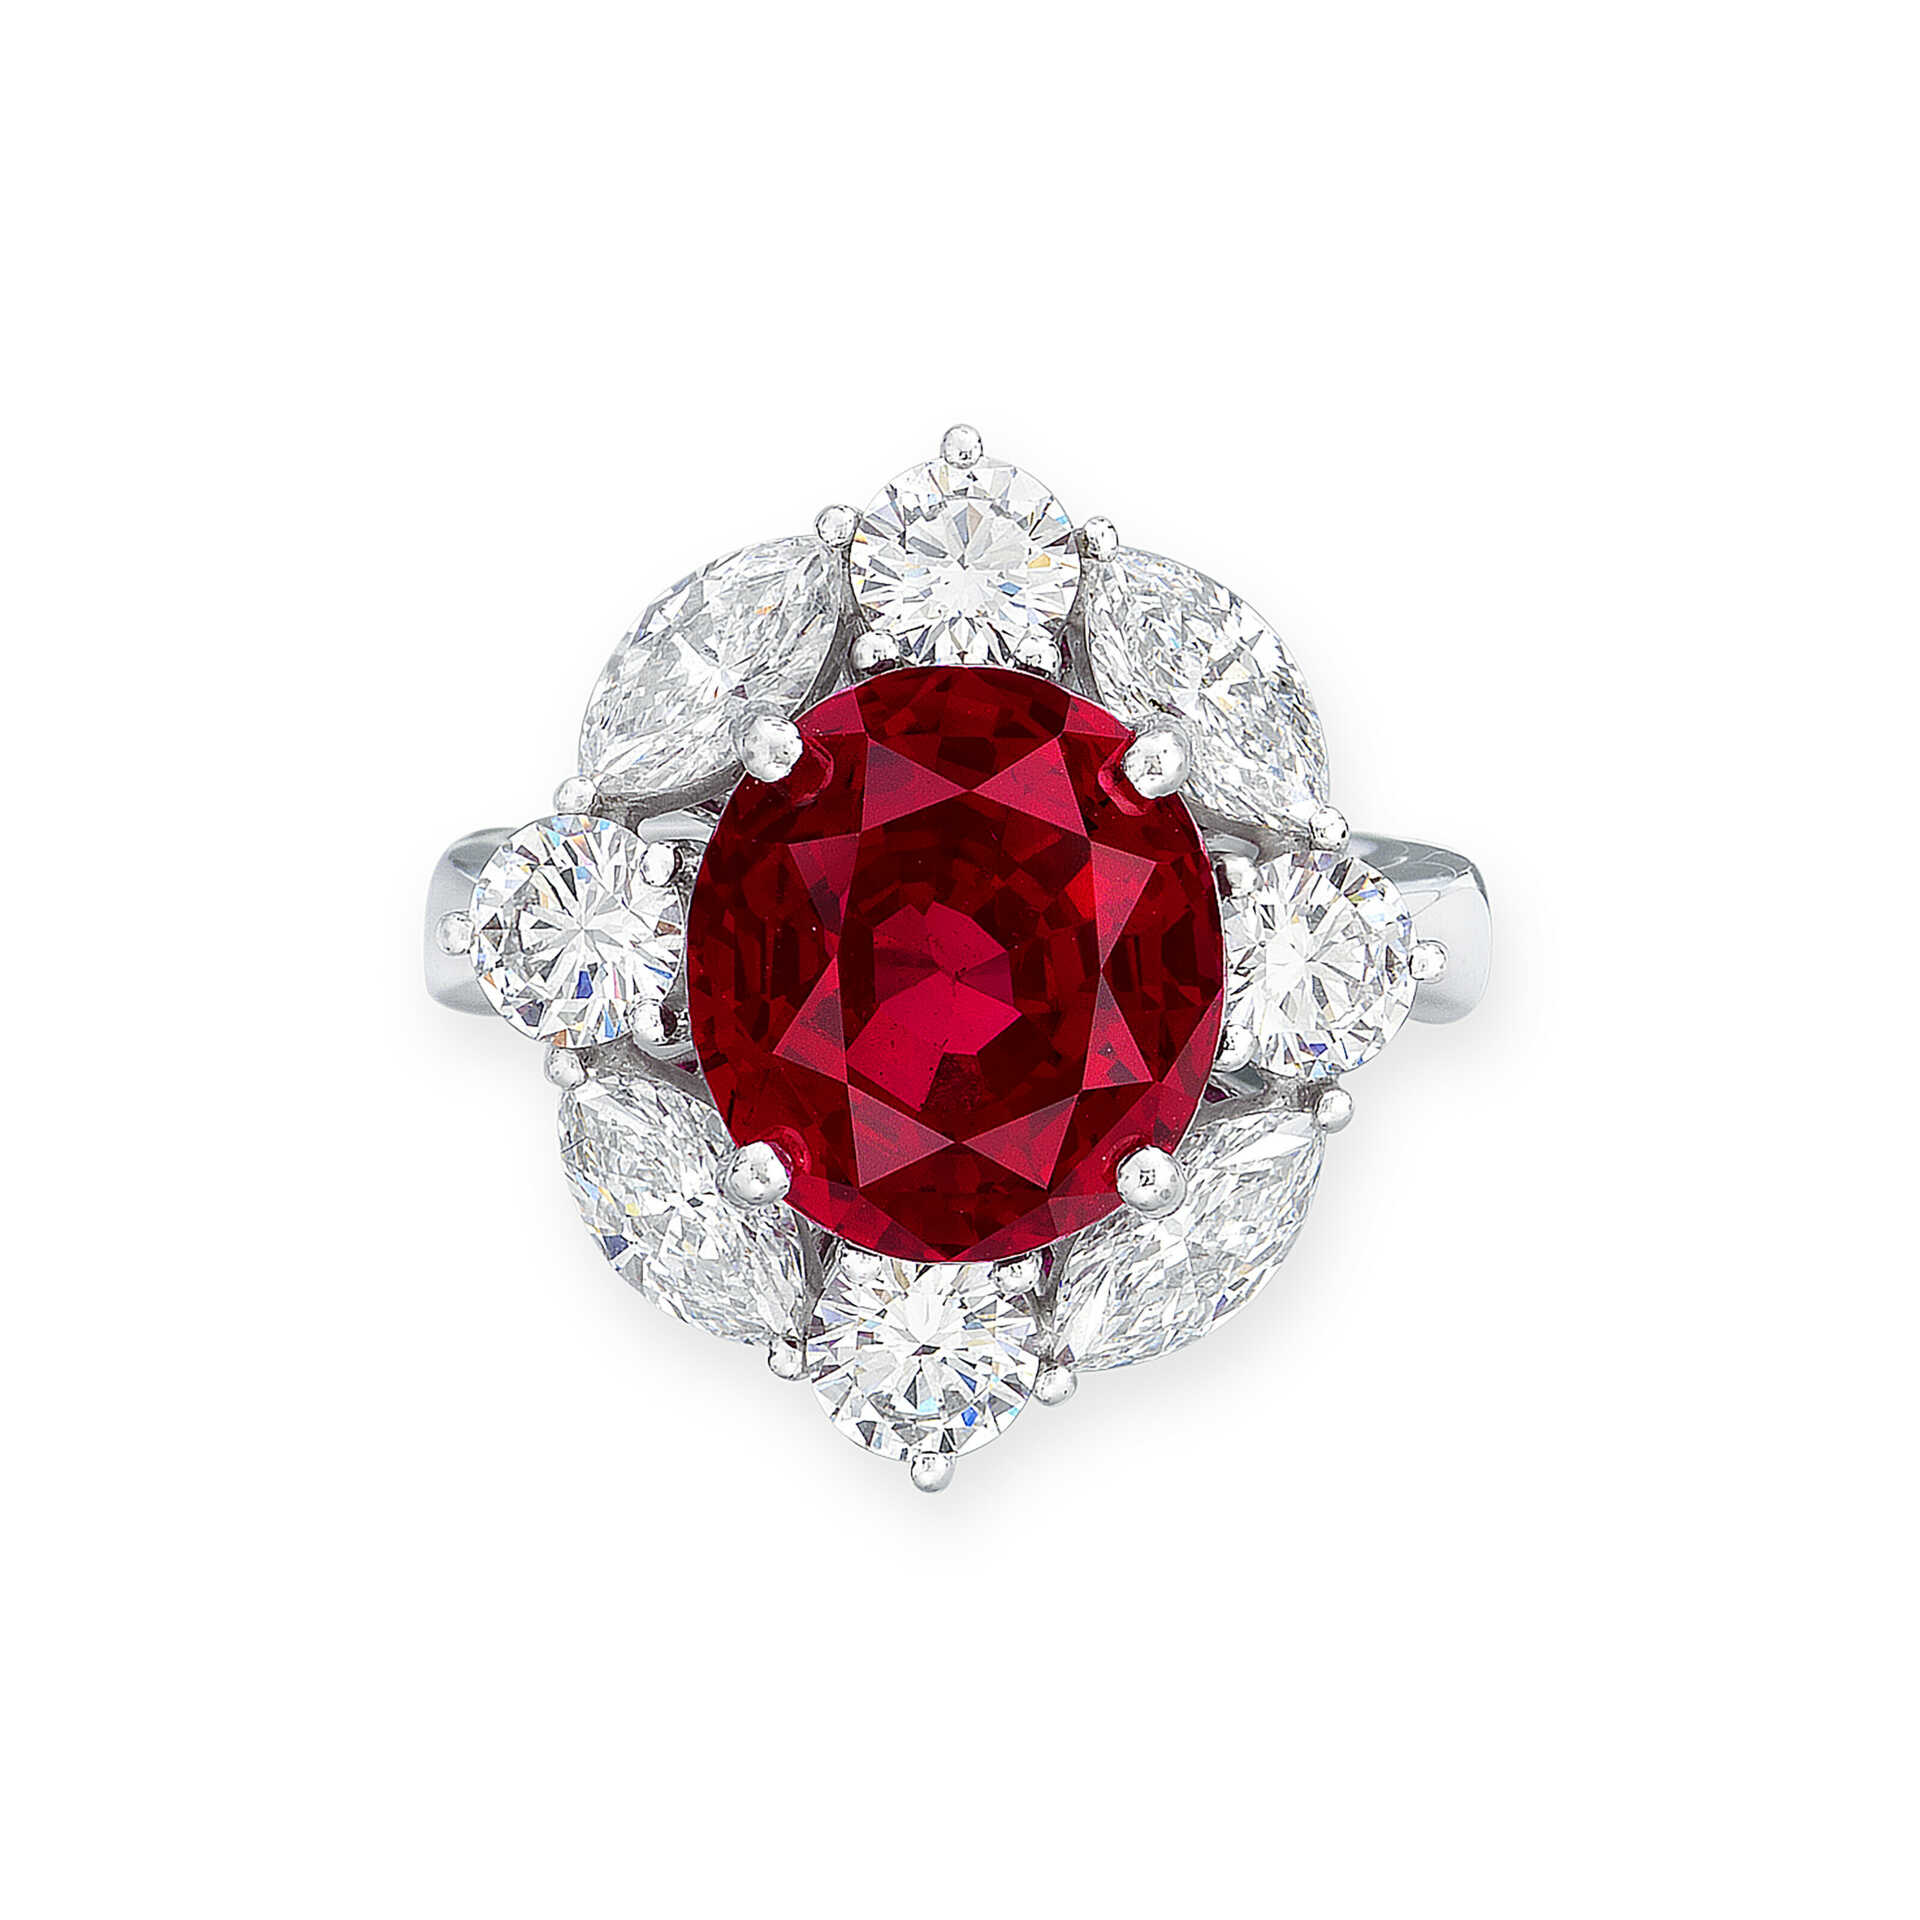 A SUPERB RUBY AND DIAMOND RING